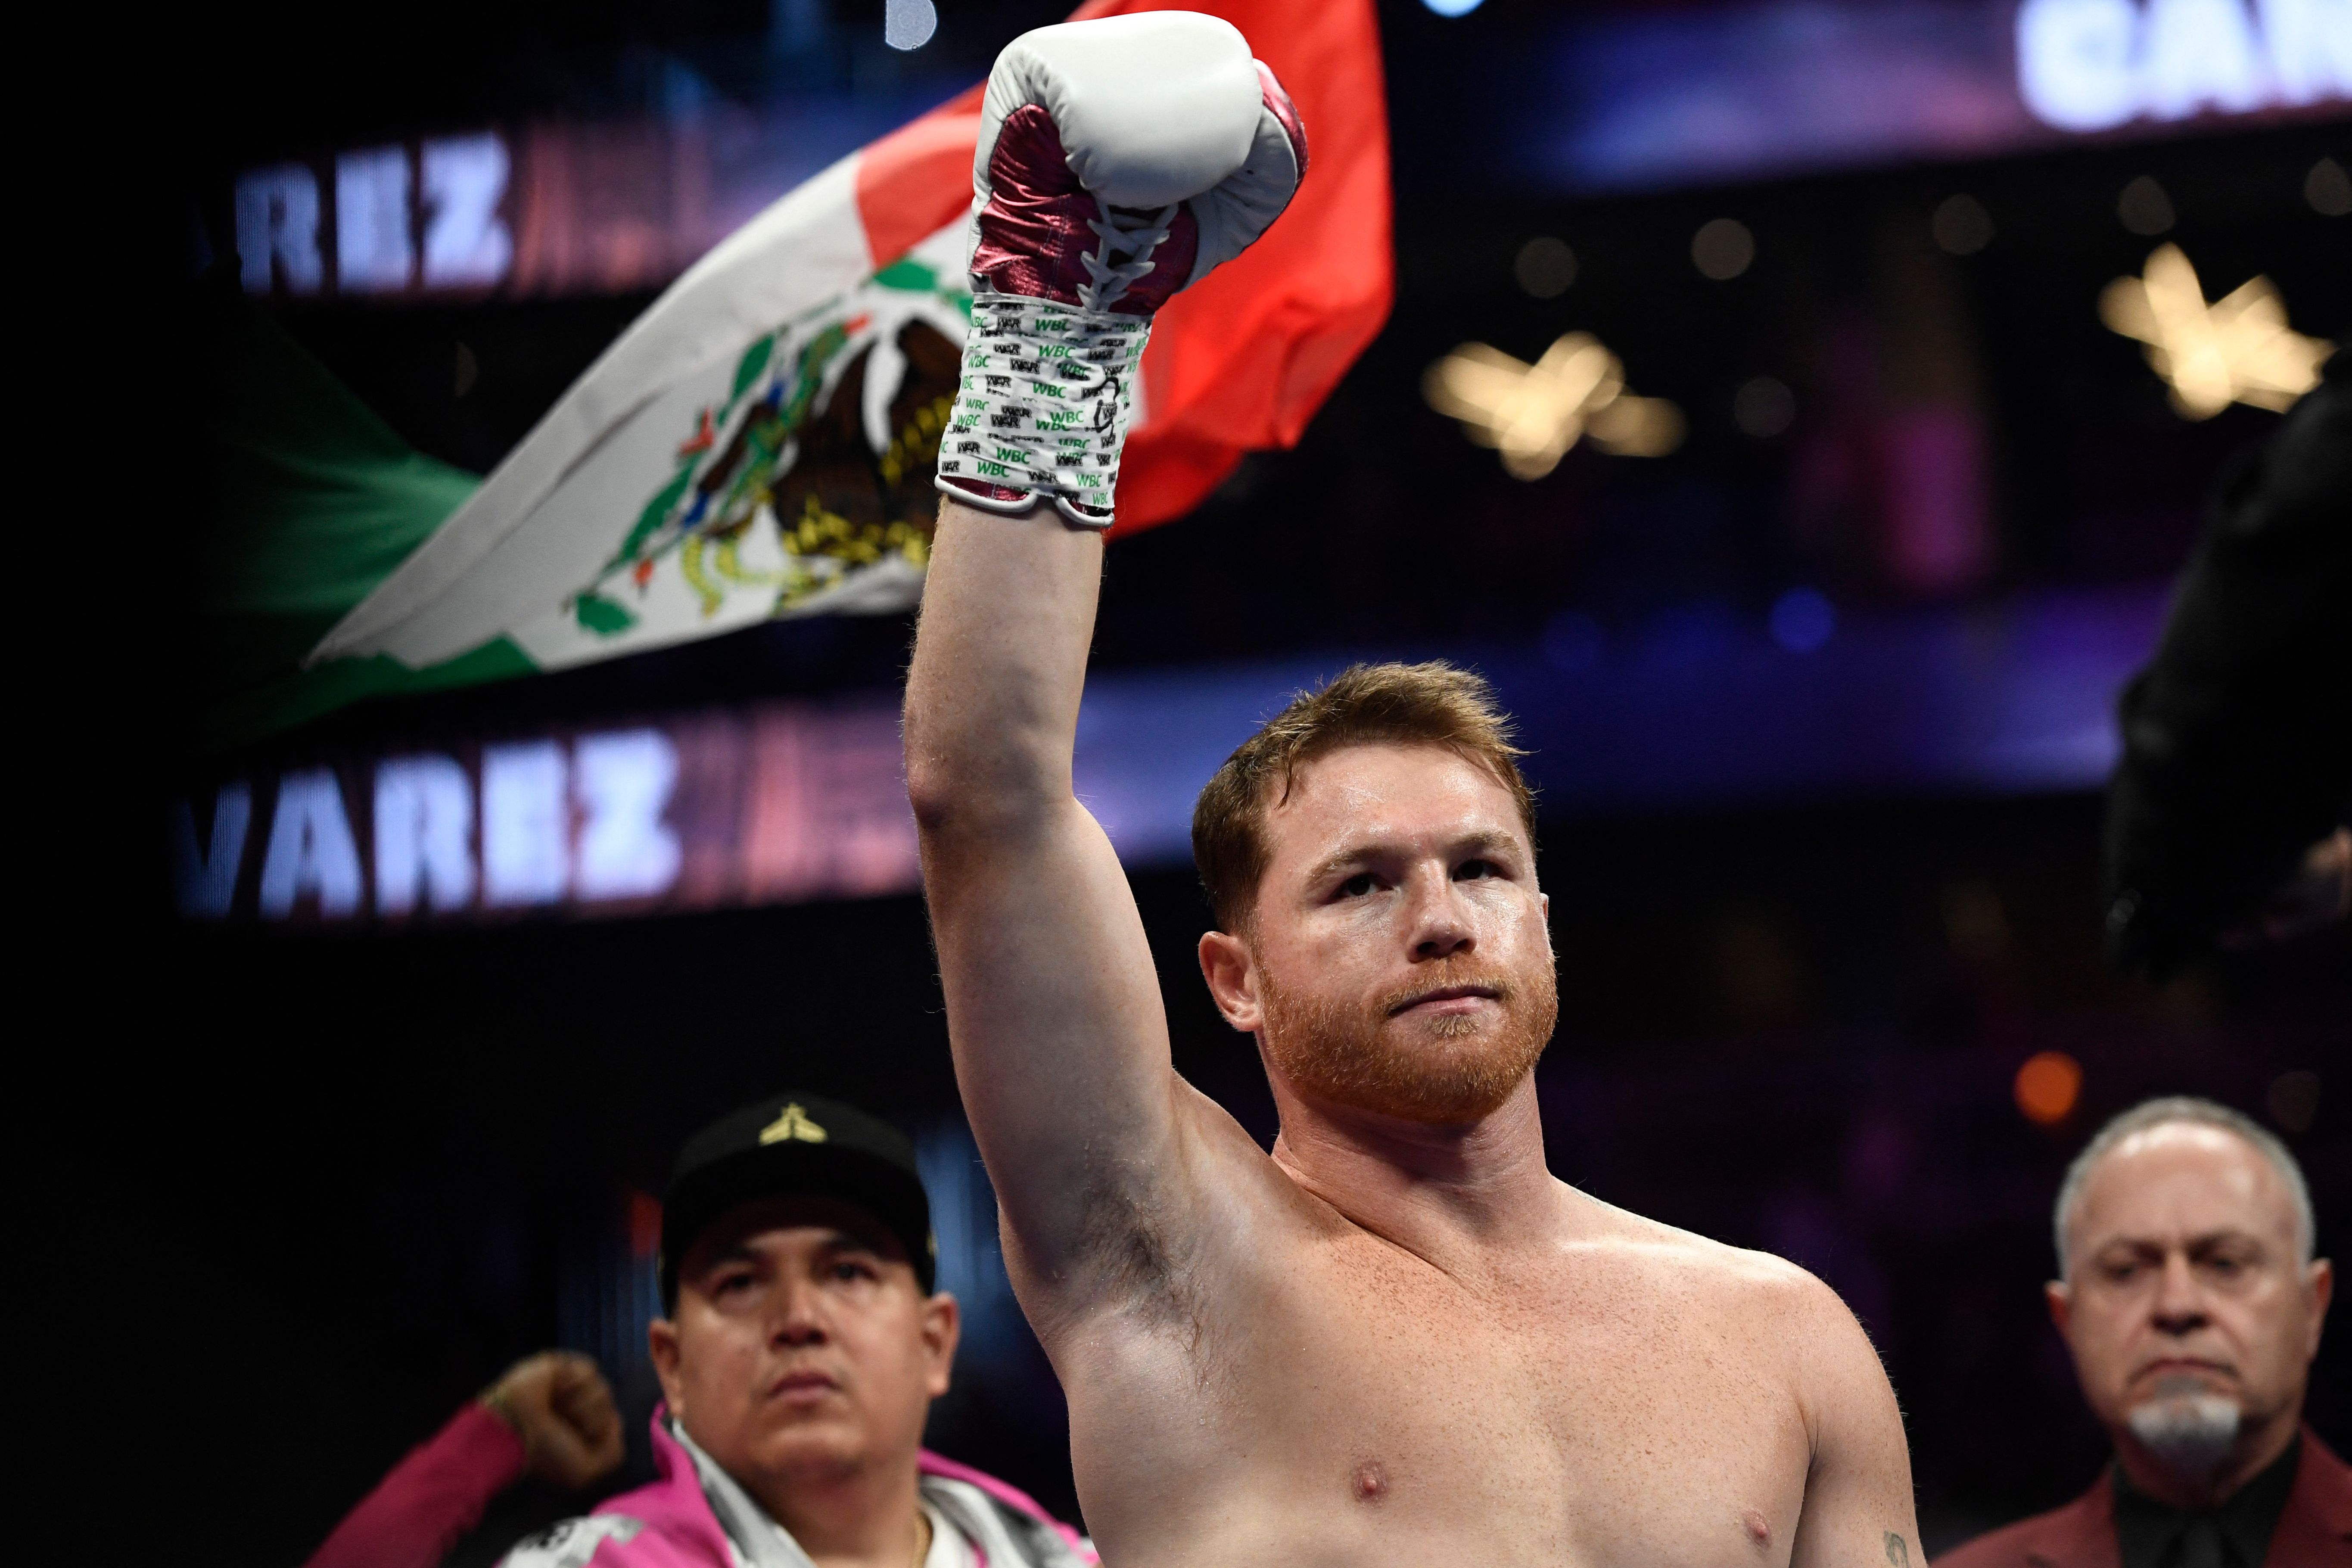 5 Things We Saw and Overheard At the Canelo vs